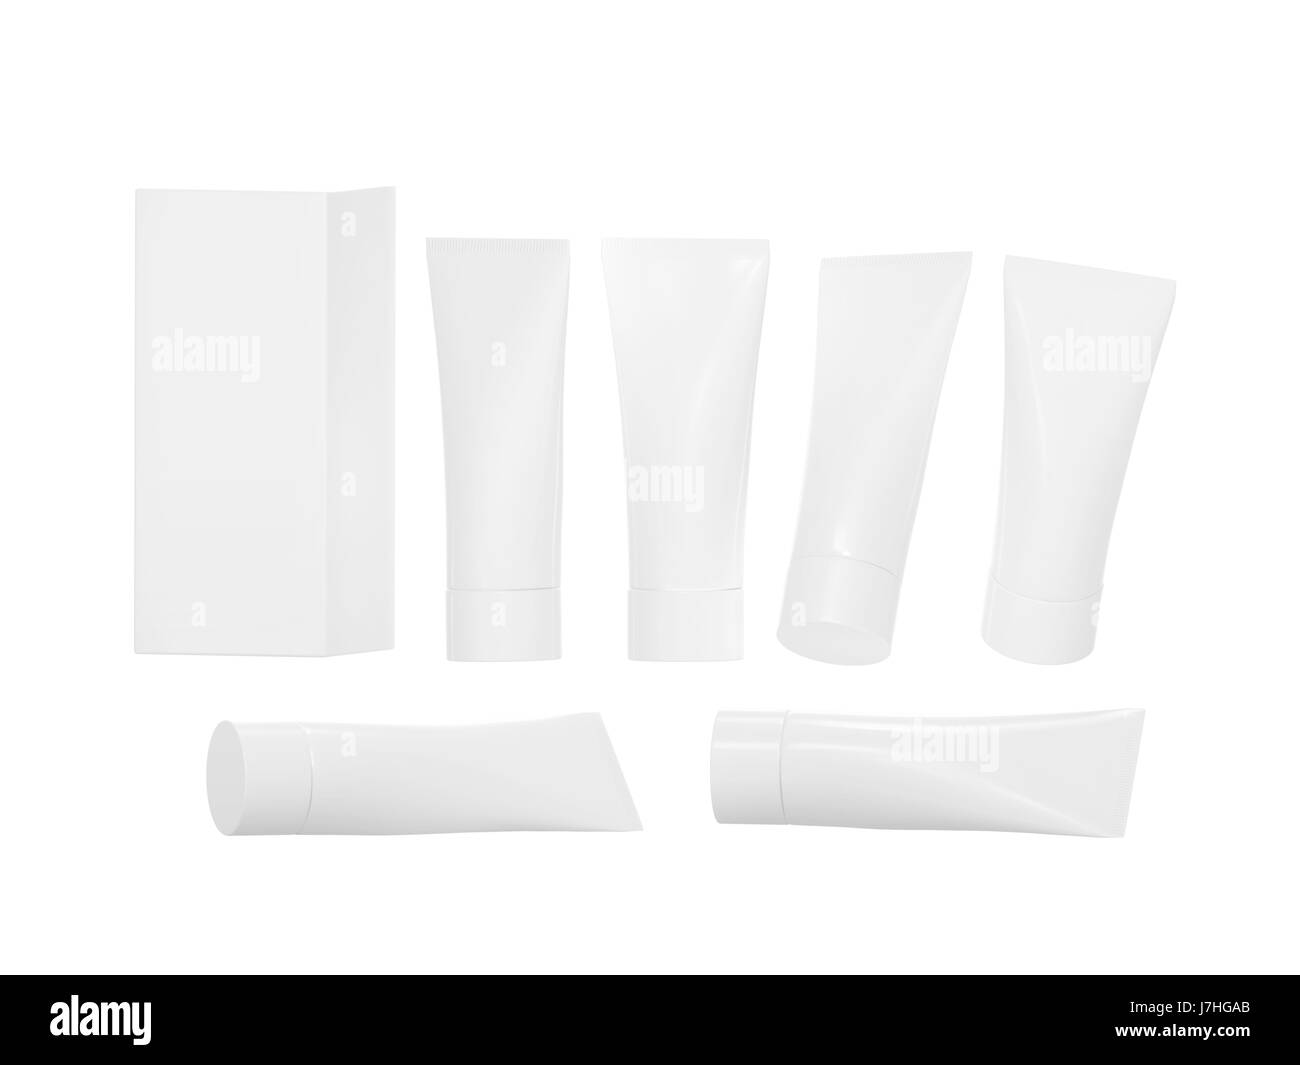 White plastic  hygiene tube  with clipping path. packaging with cap  mock up ready for your product  like beauty cream, gel  or medical product . easy Stock Photo